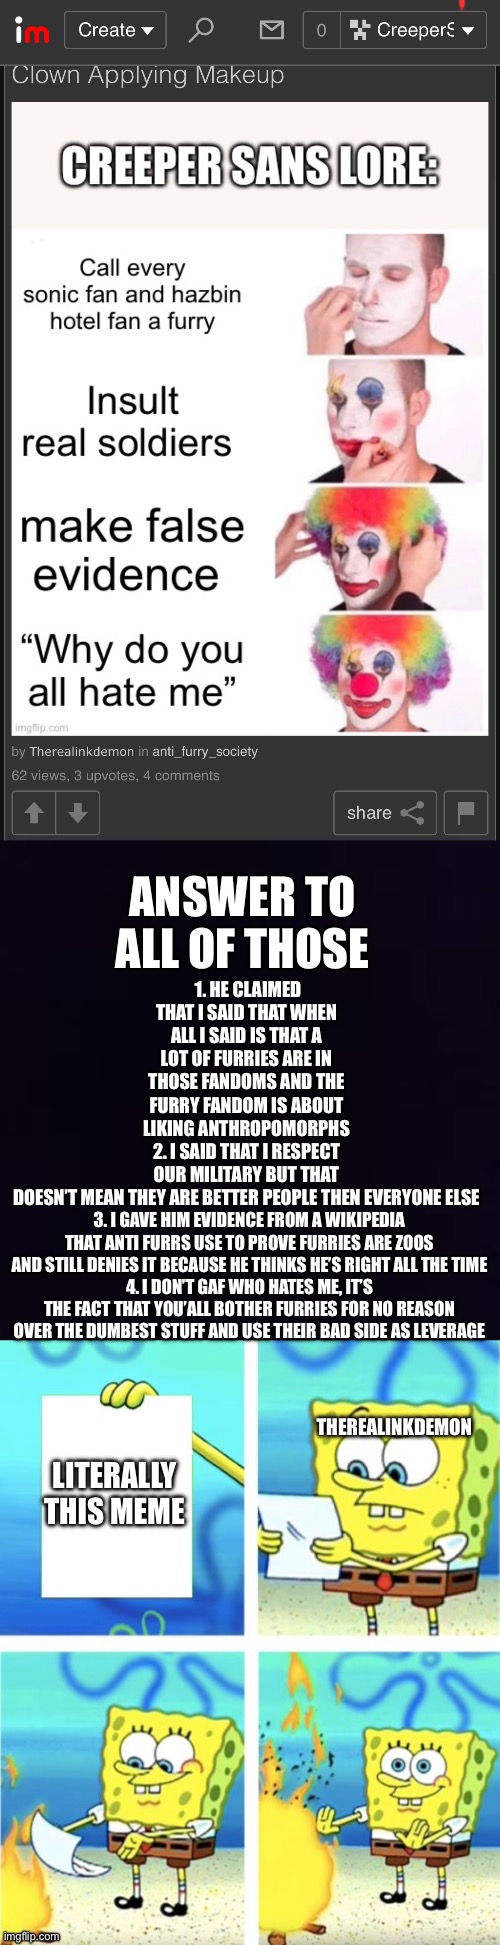 This dumbass bro I swear | 1. HE CLAIMED THAT I SAID THAT WHEN ALL I SAID IS THAT A LOT OF FURRIES ARE IN THOSE FANDOMS AND THE FURRY FANDOM IS ABOUT LIKING ANTHROPOMORPHS
2. I SAID THAT I RESPECT OUR MILITARY BUT THAT DOESN’T MEAN THEY ARE BETTER PEOPLE THEN EVERYONE ELSE; ANSWER TO ALL OF THOSE; 3. I GAVE HIM EVIDENCE FROM A WIKIPEDIA THAT ANTI FURRS USE TO PROVE FURRIES ARE ZOOS AND STILL DENIES IT BECAUSE HE THINKS HE’S RIGHT ALL THE TIME
4. I DON’T GAF WHO HATES ME, IT’S THE FACT THAT YOU’ALL BOTHER FURRIES FOR NO REASON OVER THE DUMBEST STUFF AND USE THEIR BAD SIDE AS LEVERAGE; THEREALINKDEMON; LITERALLY THIS MEME | image tagged in unnecessary tags,ha ha tags go brr,you have been eternally cursed for reading the tags | made w/ Imgflip meme maker